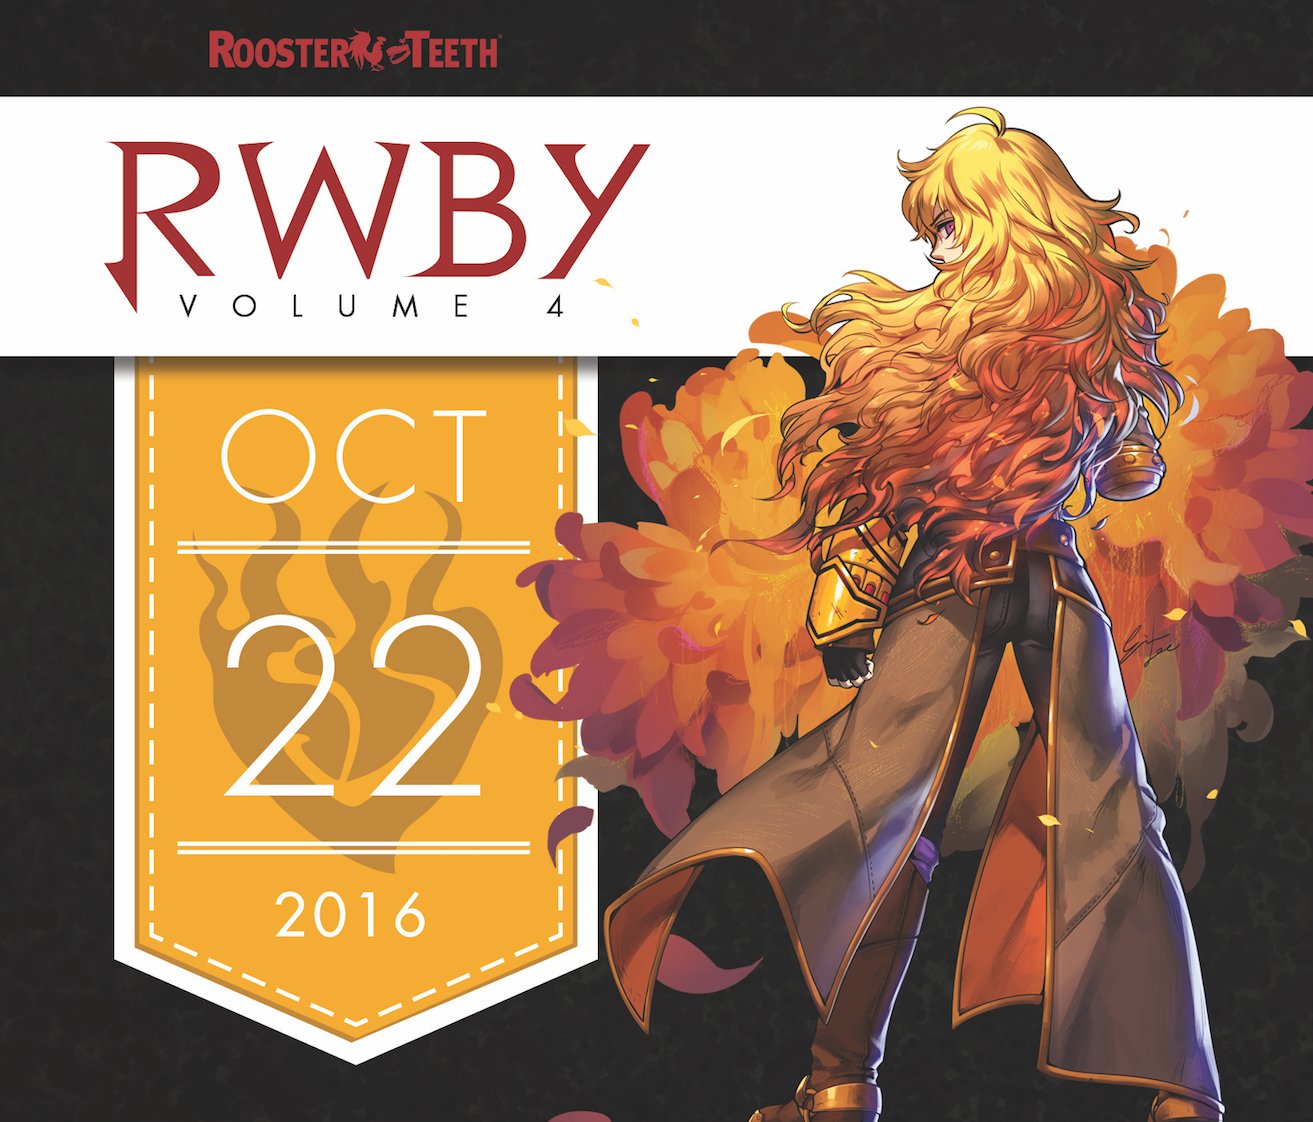 Rooster Teeth To Complete The 4 Here S Yang Rwby Volume 4 October 22nd